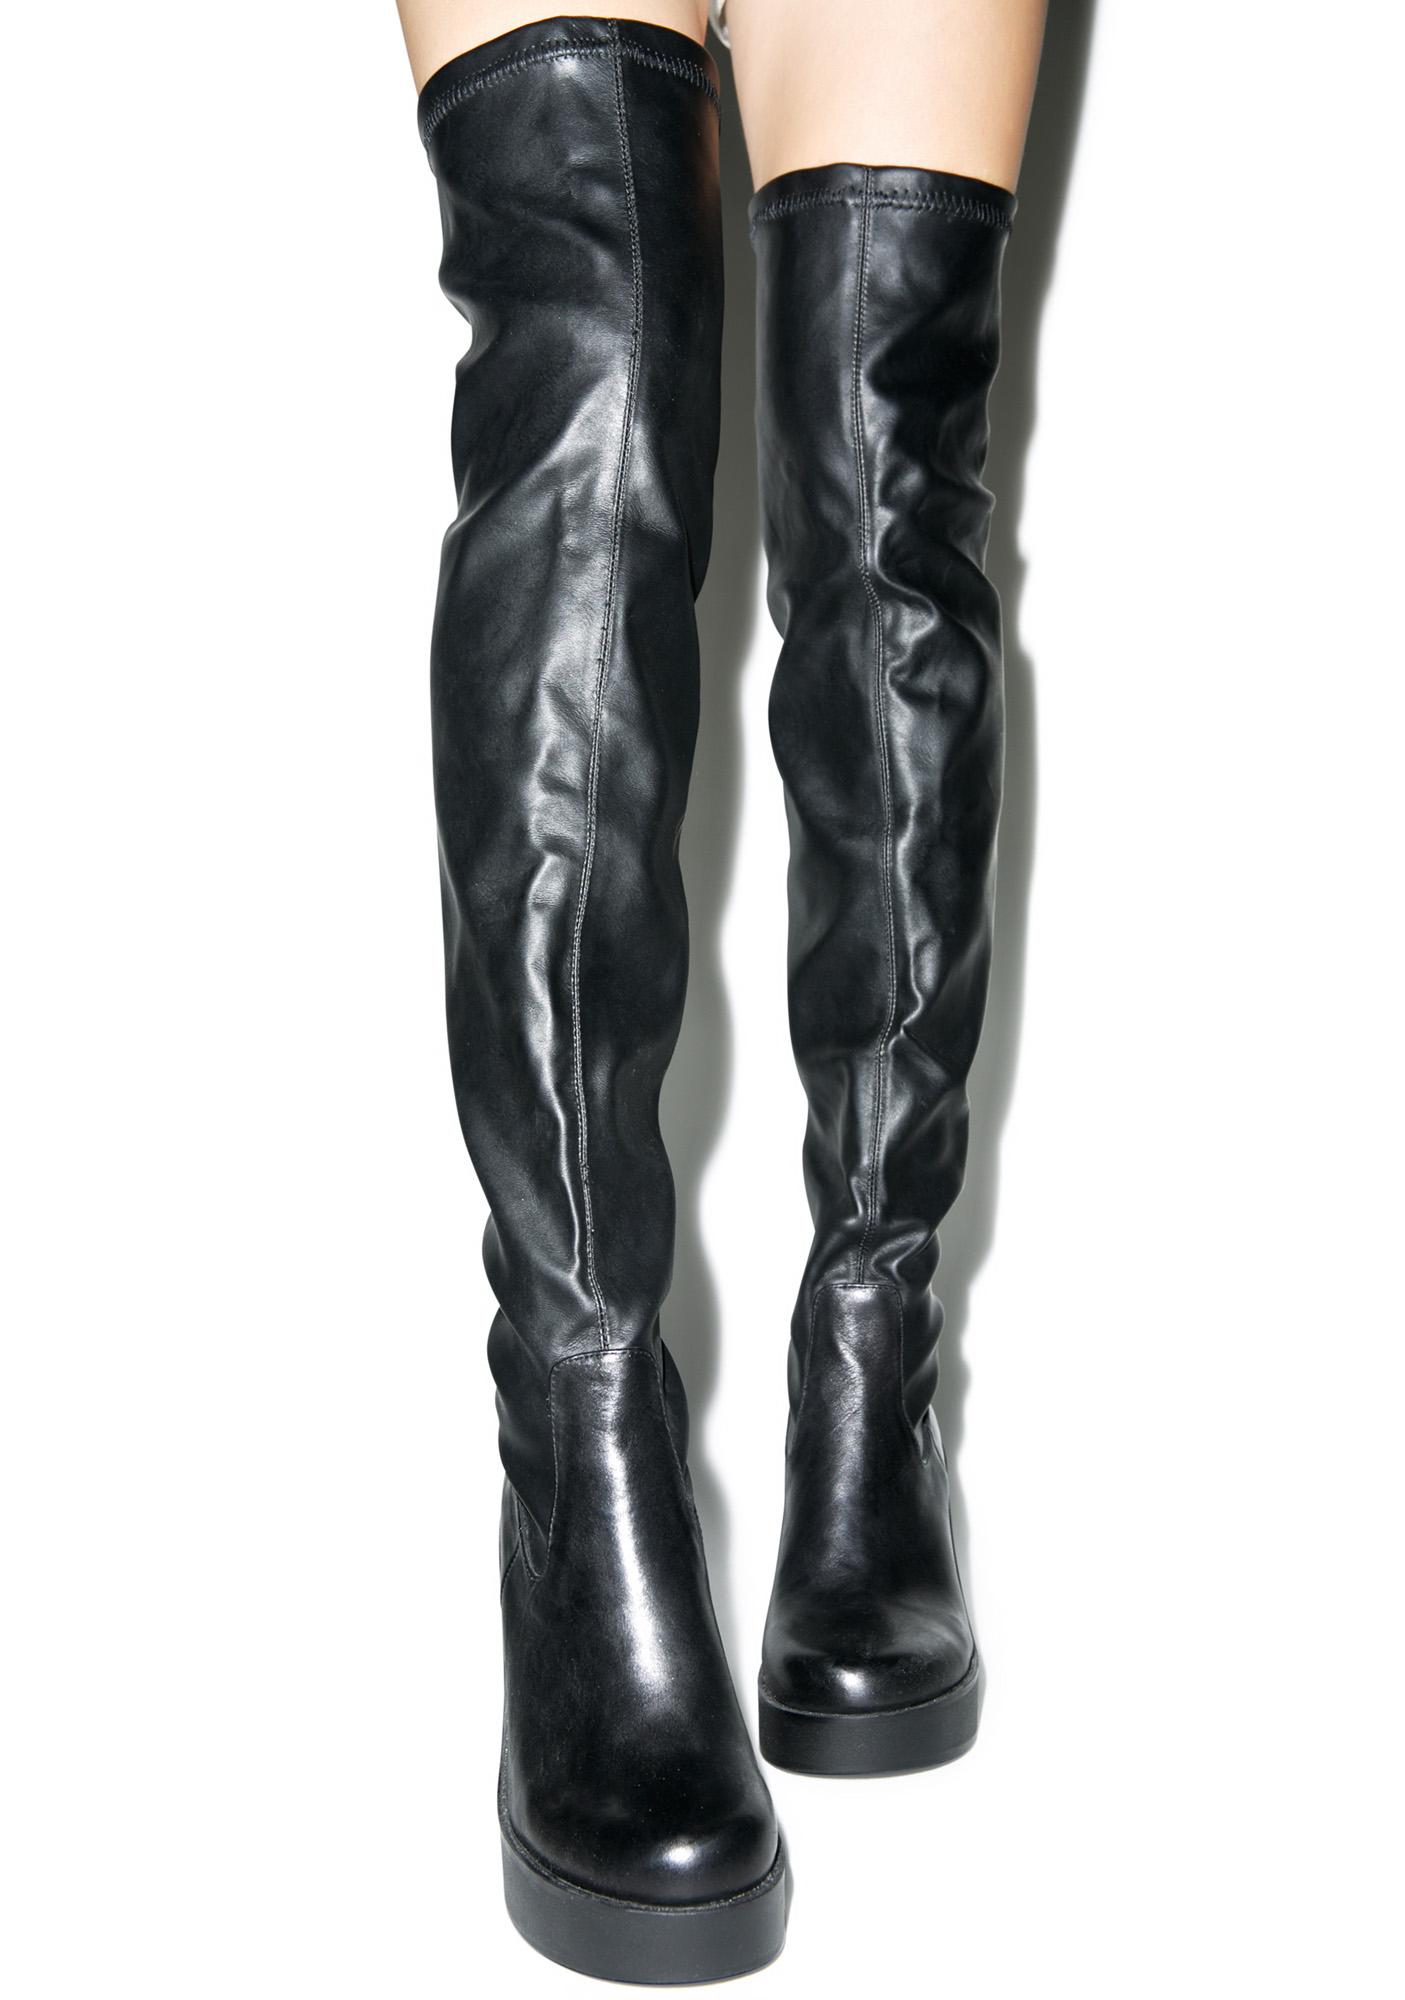 windsor smith thigh high boots